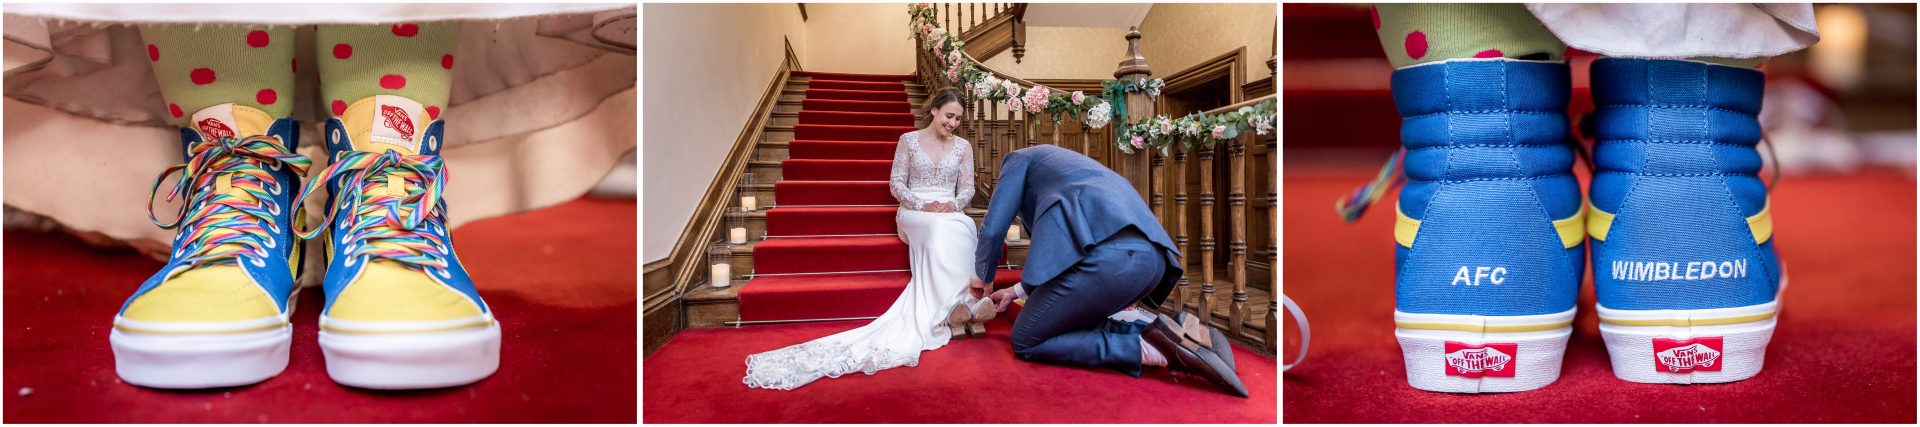 The bride puts trainers on for the evening party